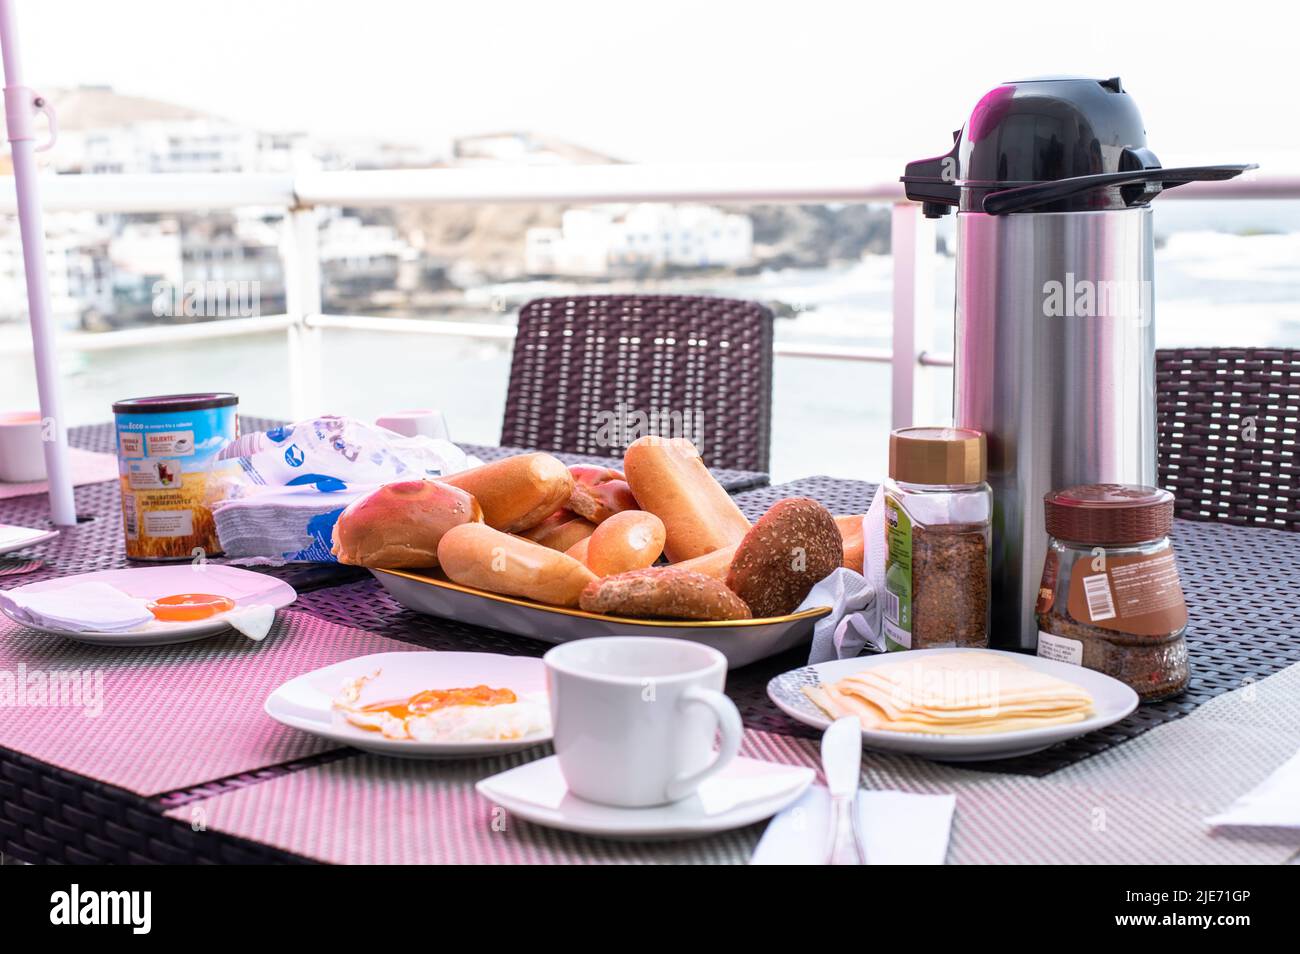 Breakfast on a wood table with a beach front view. French toast for breakfast with sea view. Perfect place for a breakfast delicious Stock Photo